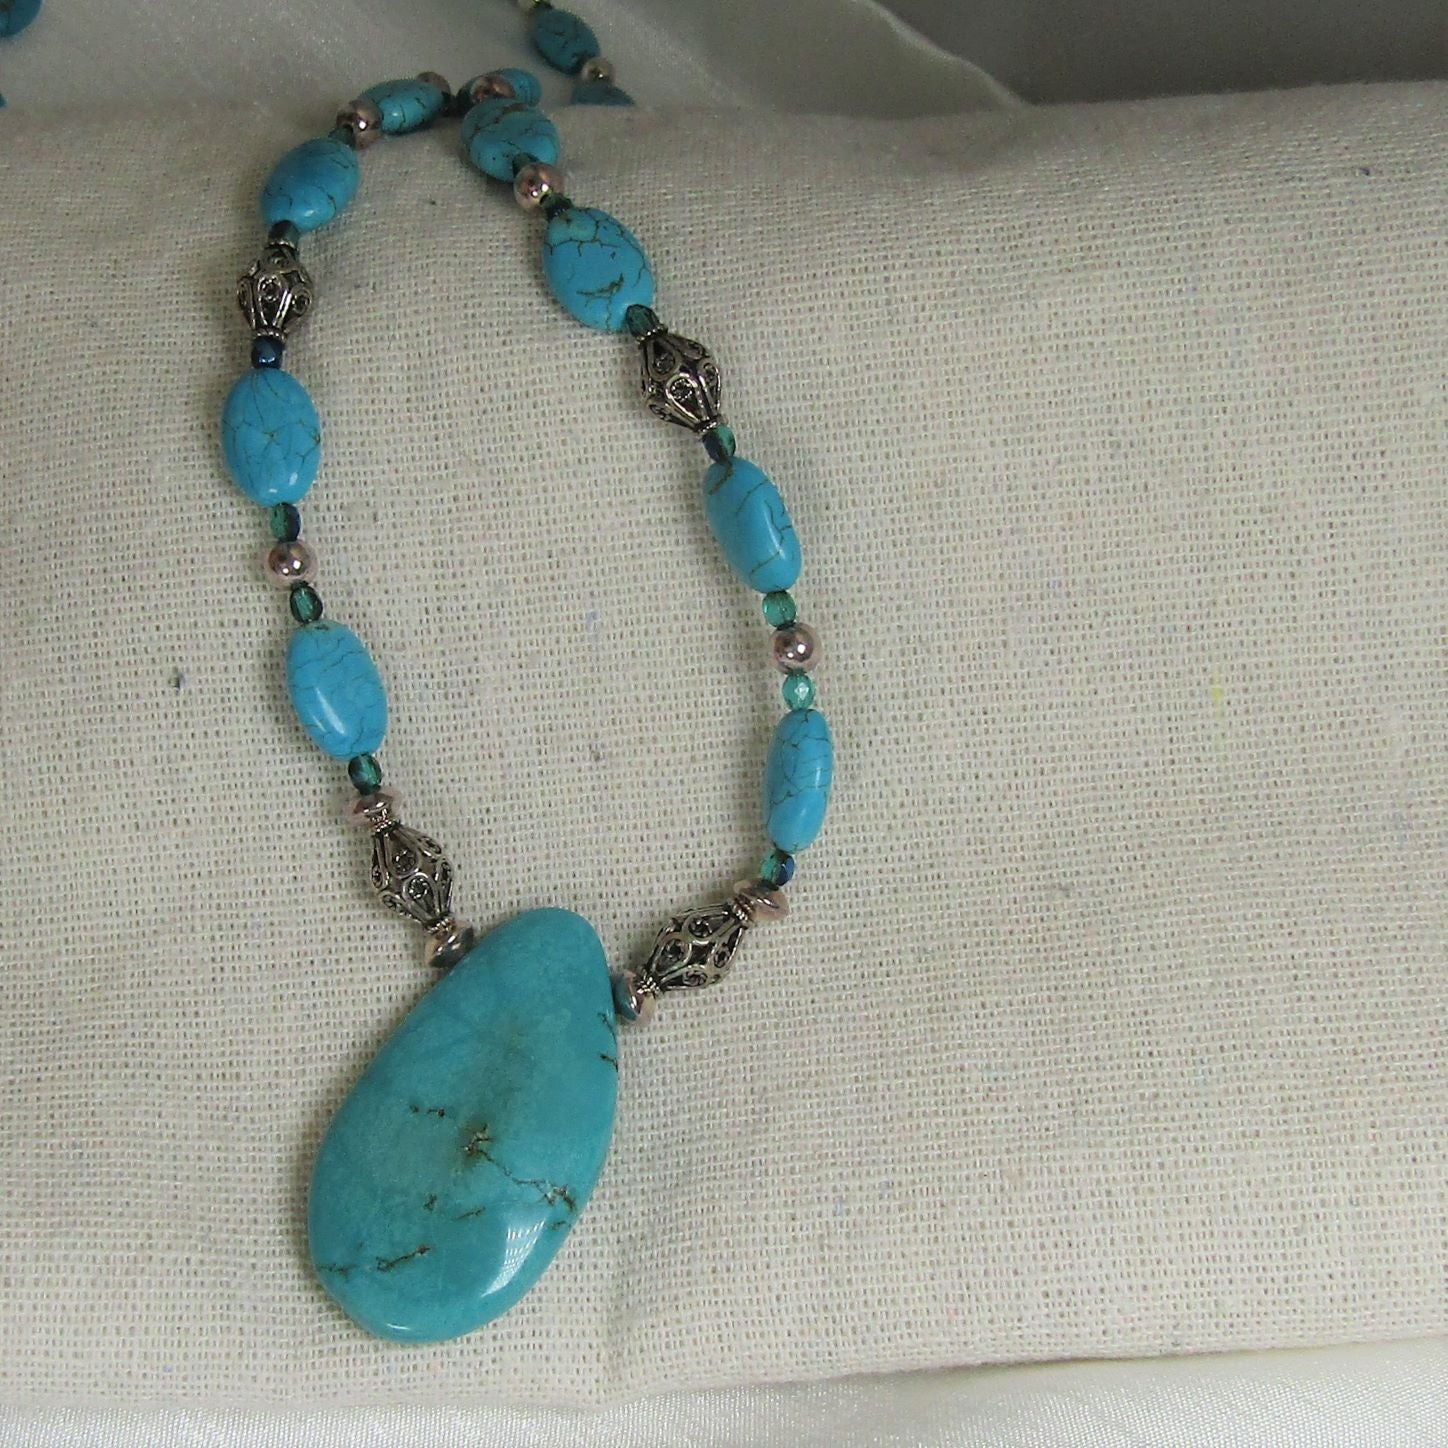 Turquoise and Crystal Beaded Necklace - VP's Jewelry